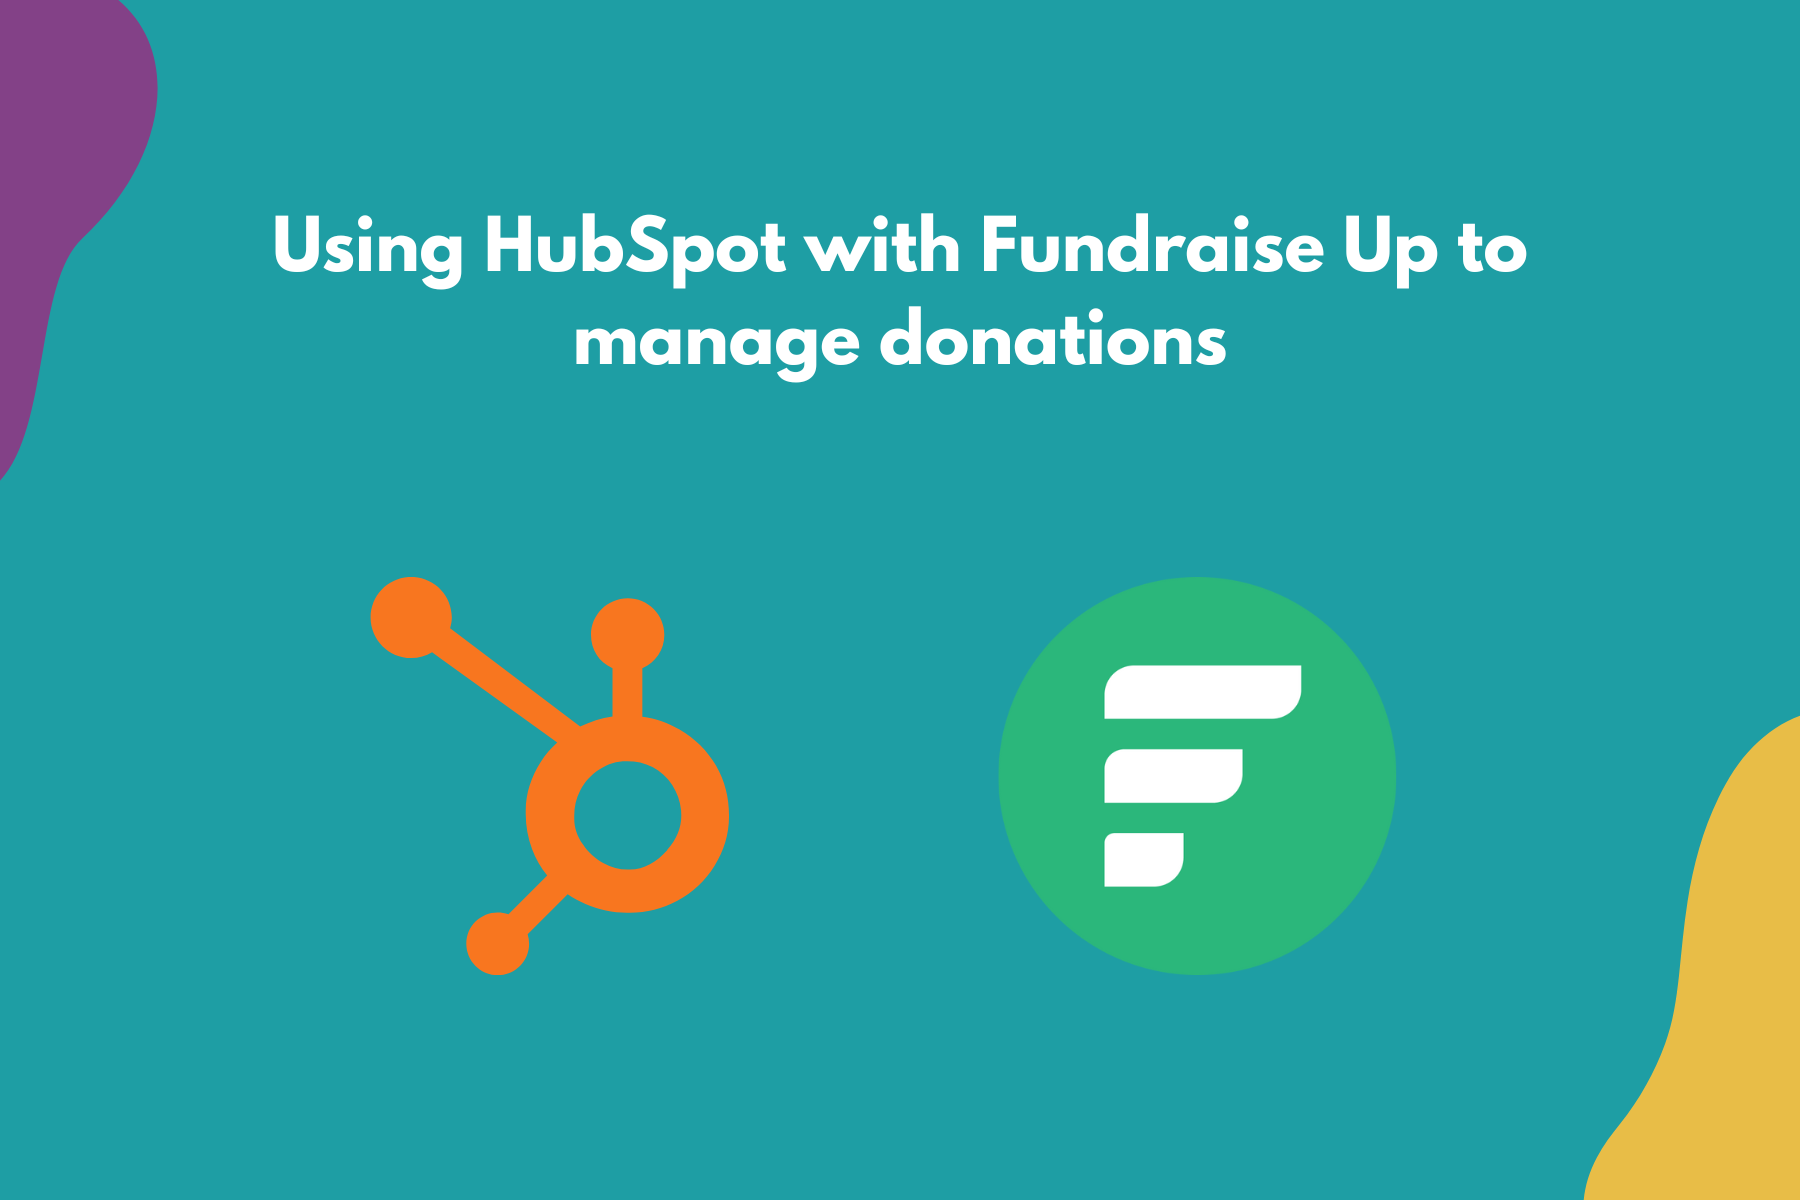 Using HubSpot with Fundraise Up to manage donations